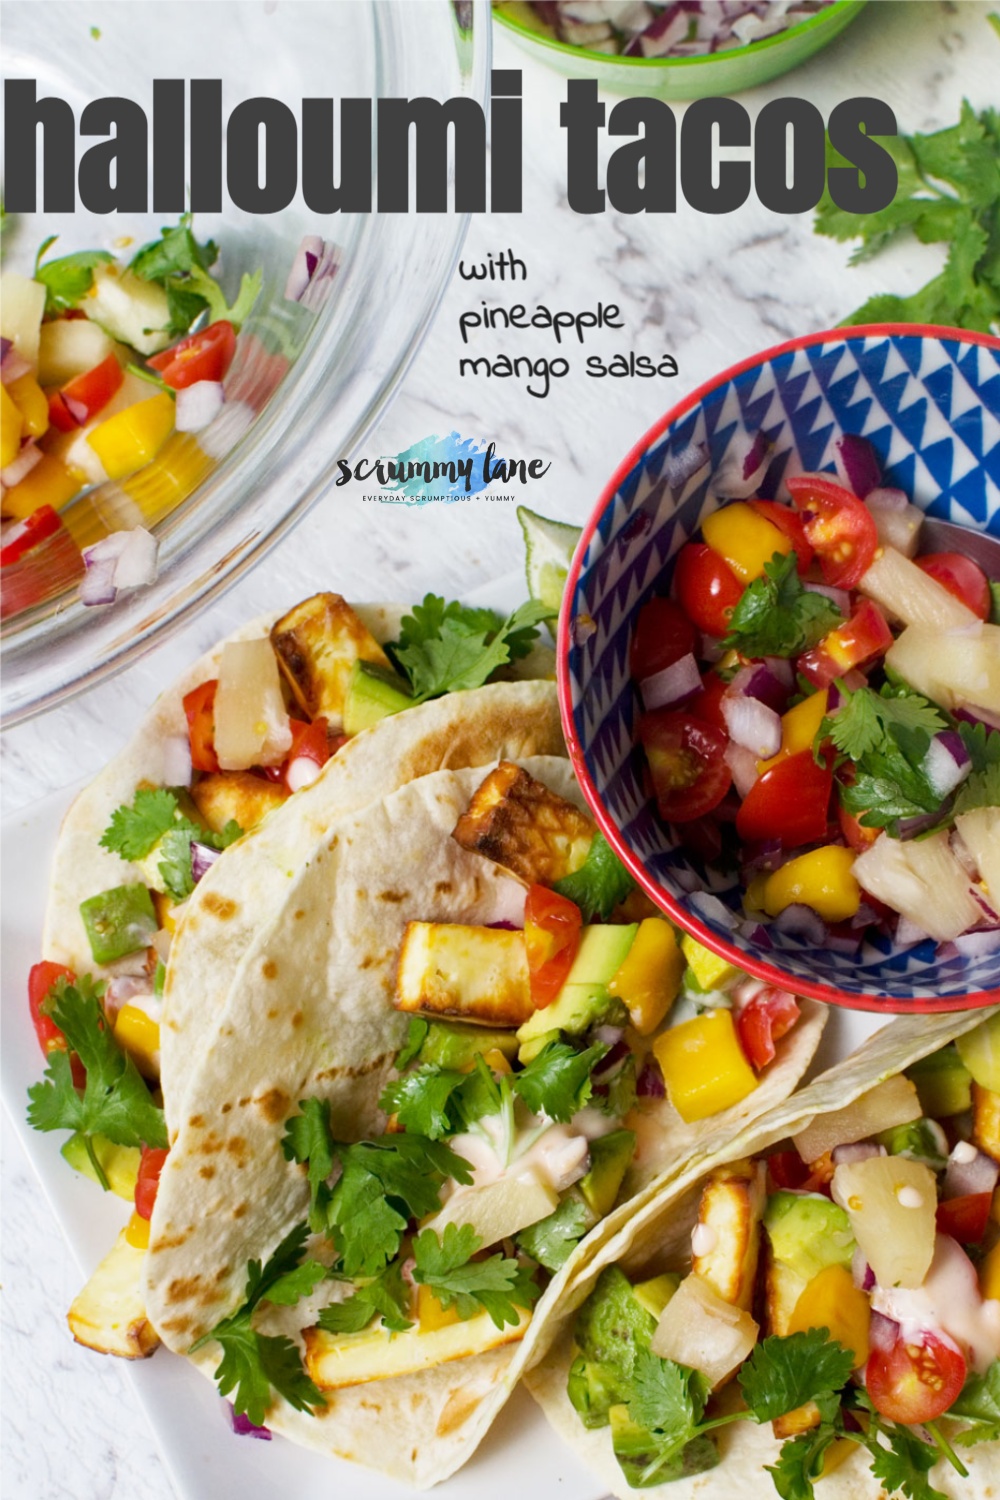 A close up of 3 halloumi tacos with pineapple mango salsa with a grey title on for Pinterest